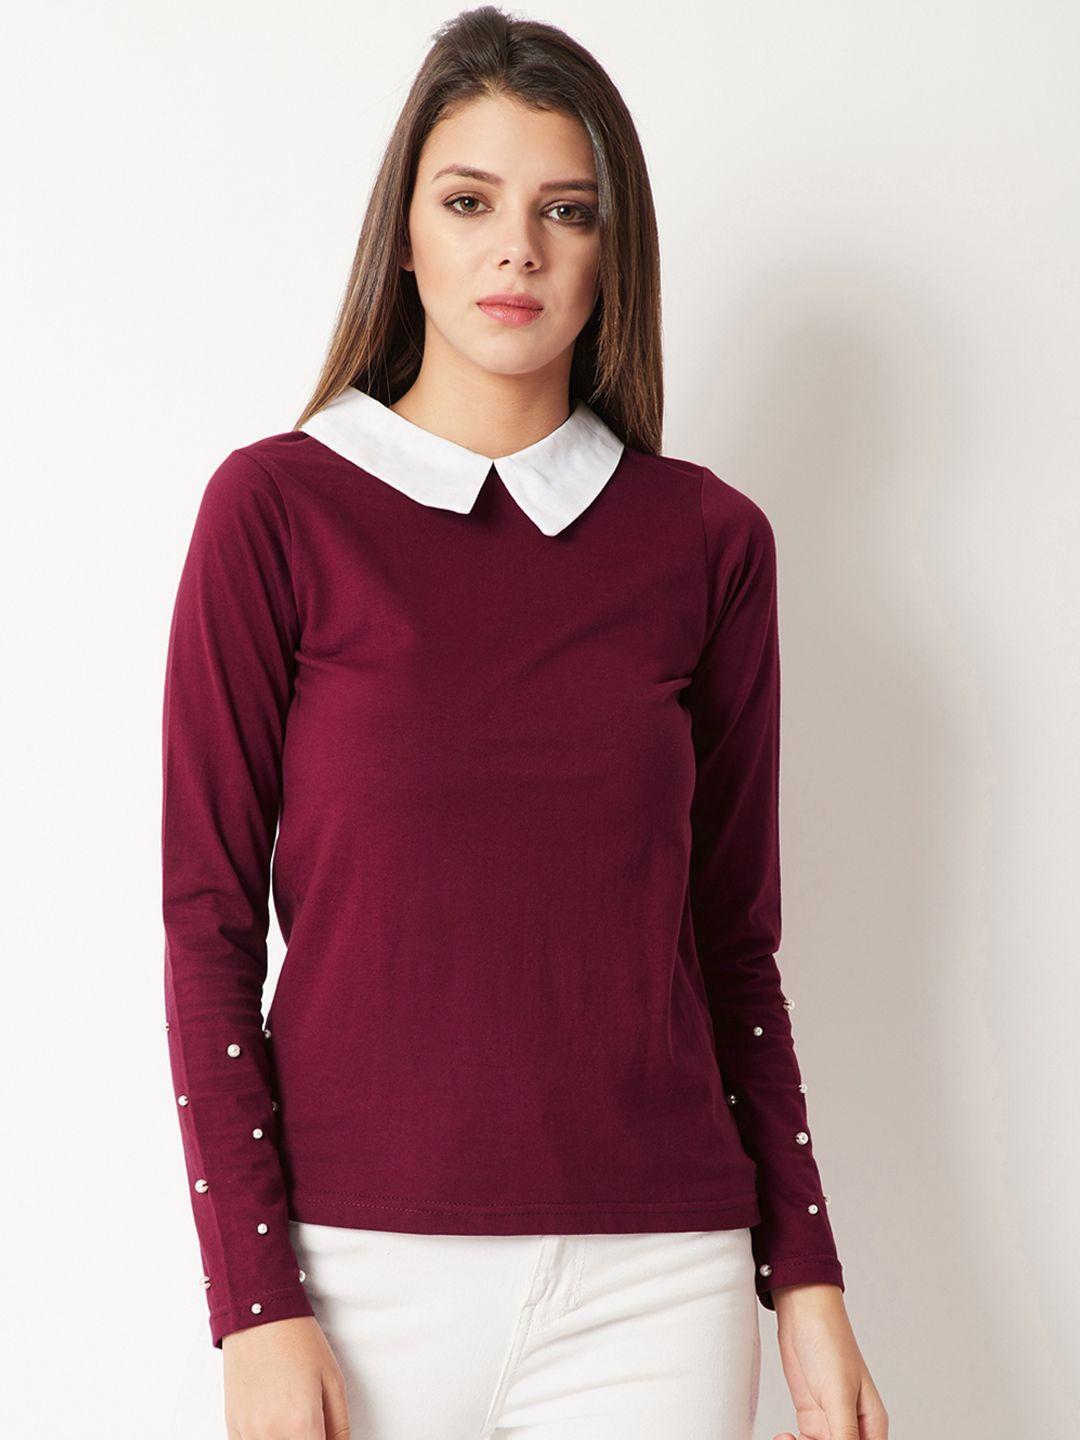 miss-chase-women-burgundy-solid-top